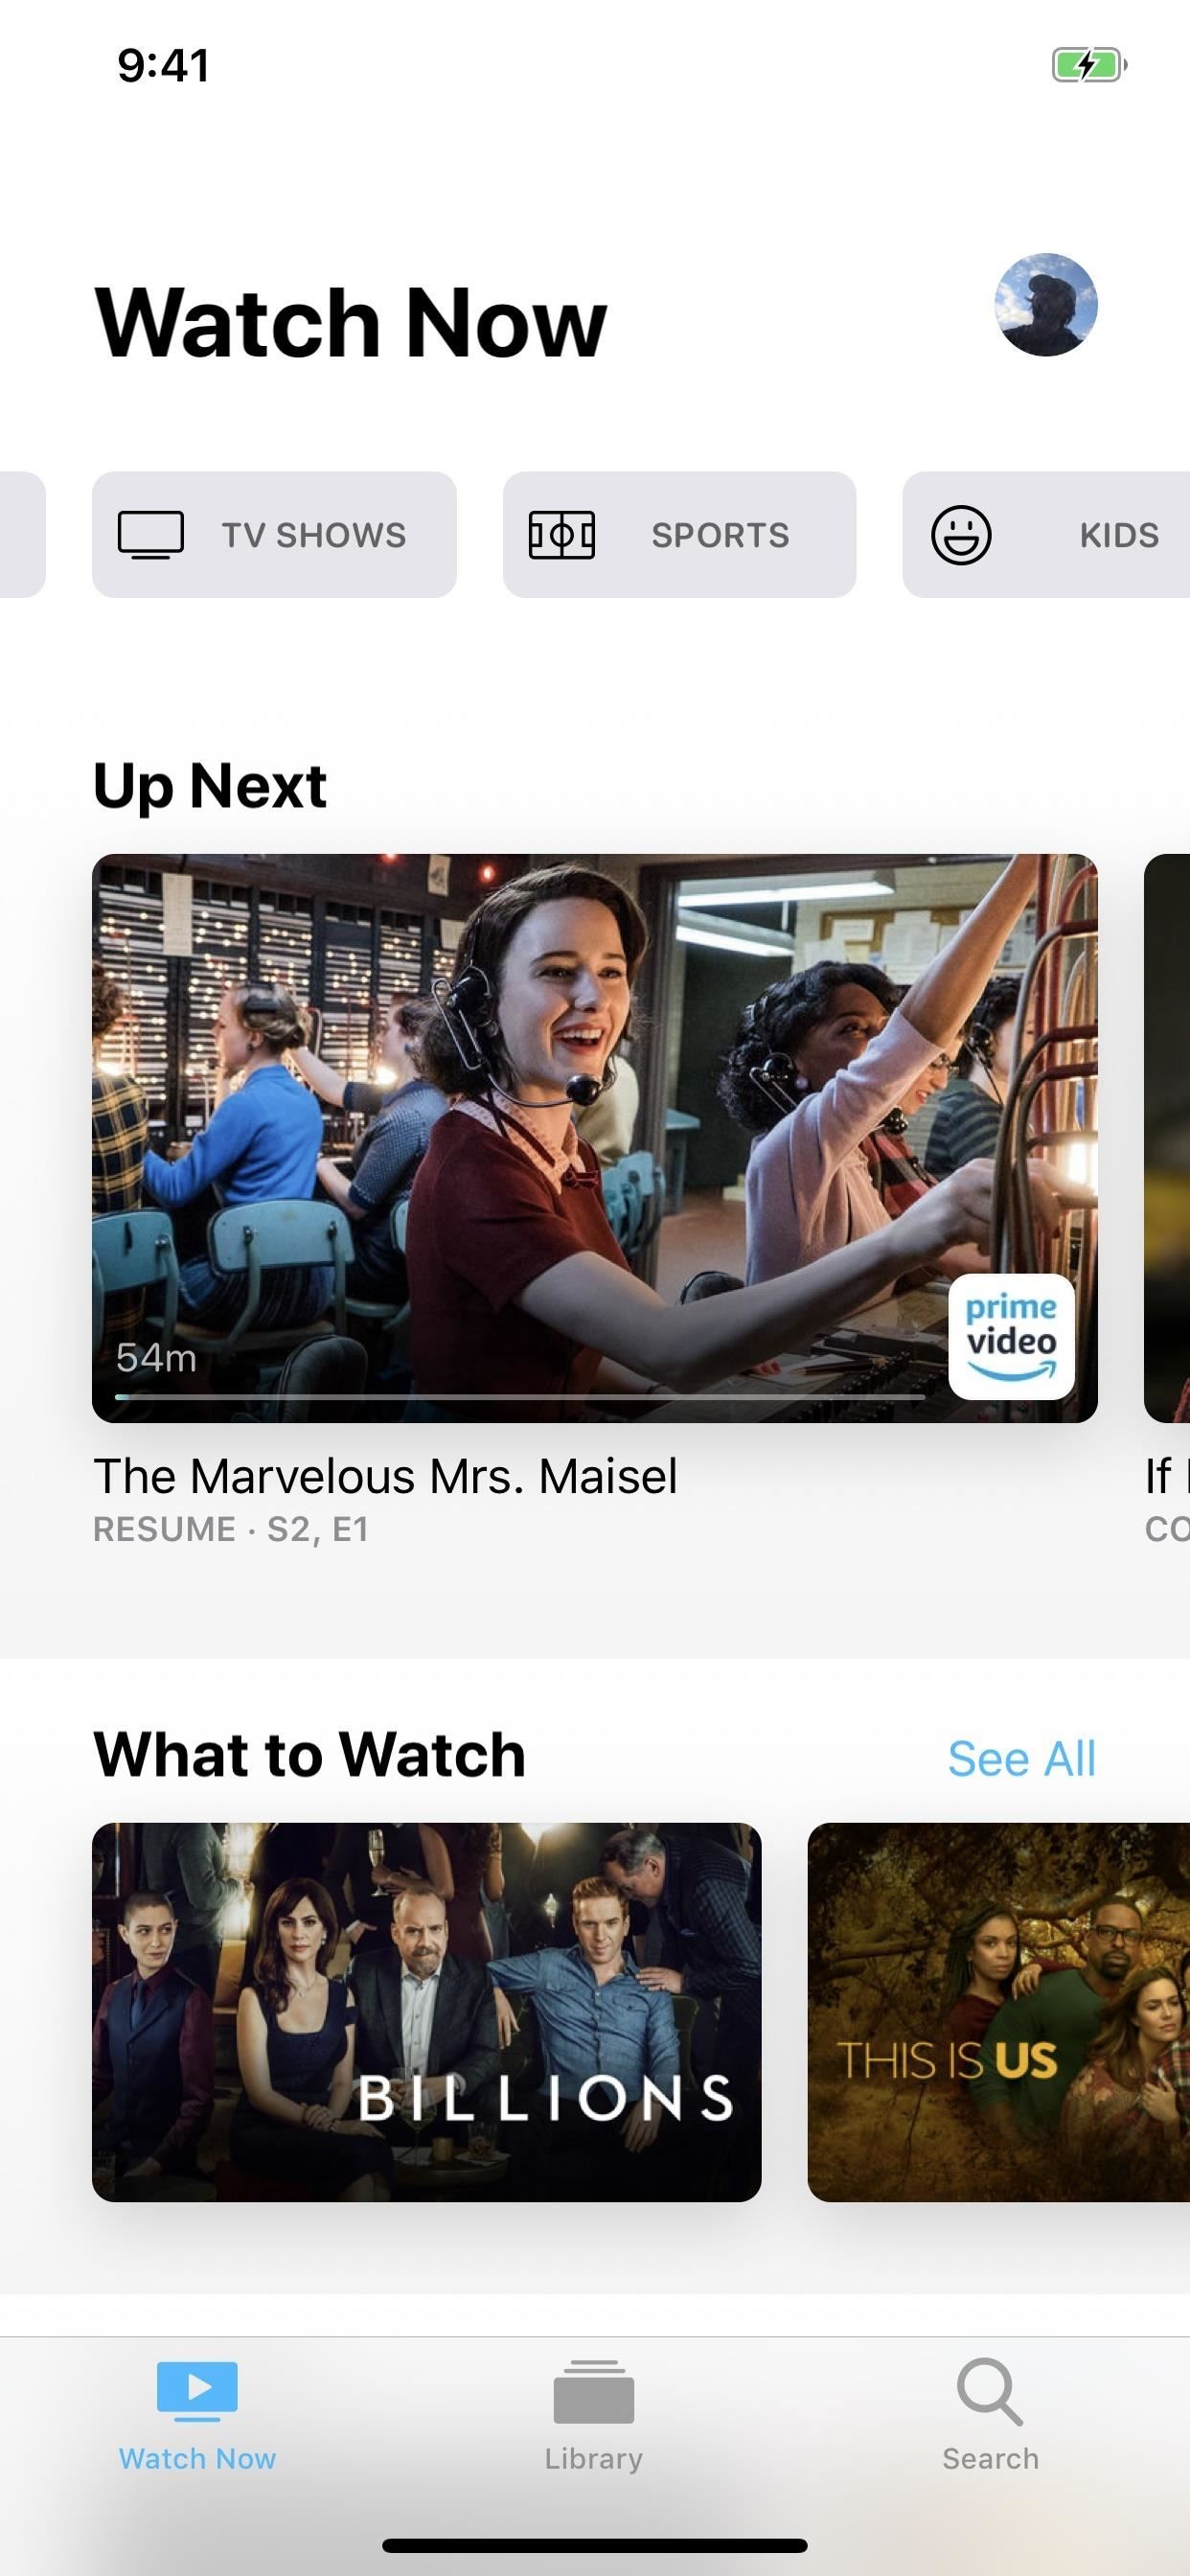 iOS 12.3 Features You Don't Want to Miss, Including Apple TV Channels, AirPlay 2-Enabled TVs & Apple Pay in Apple Apps